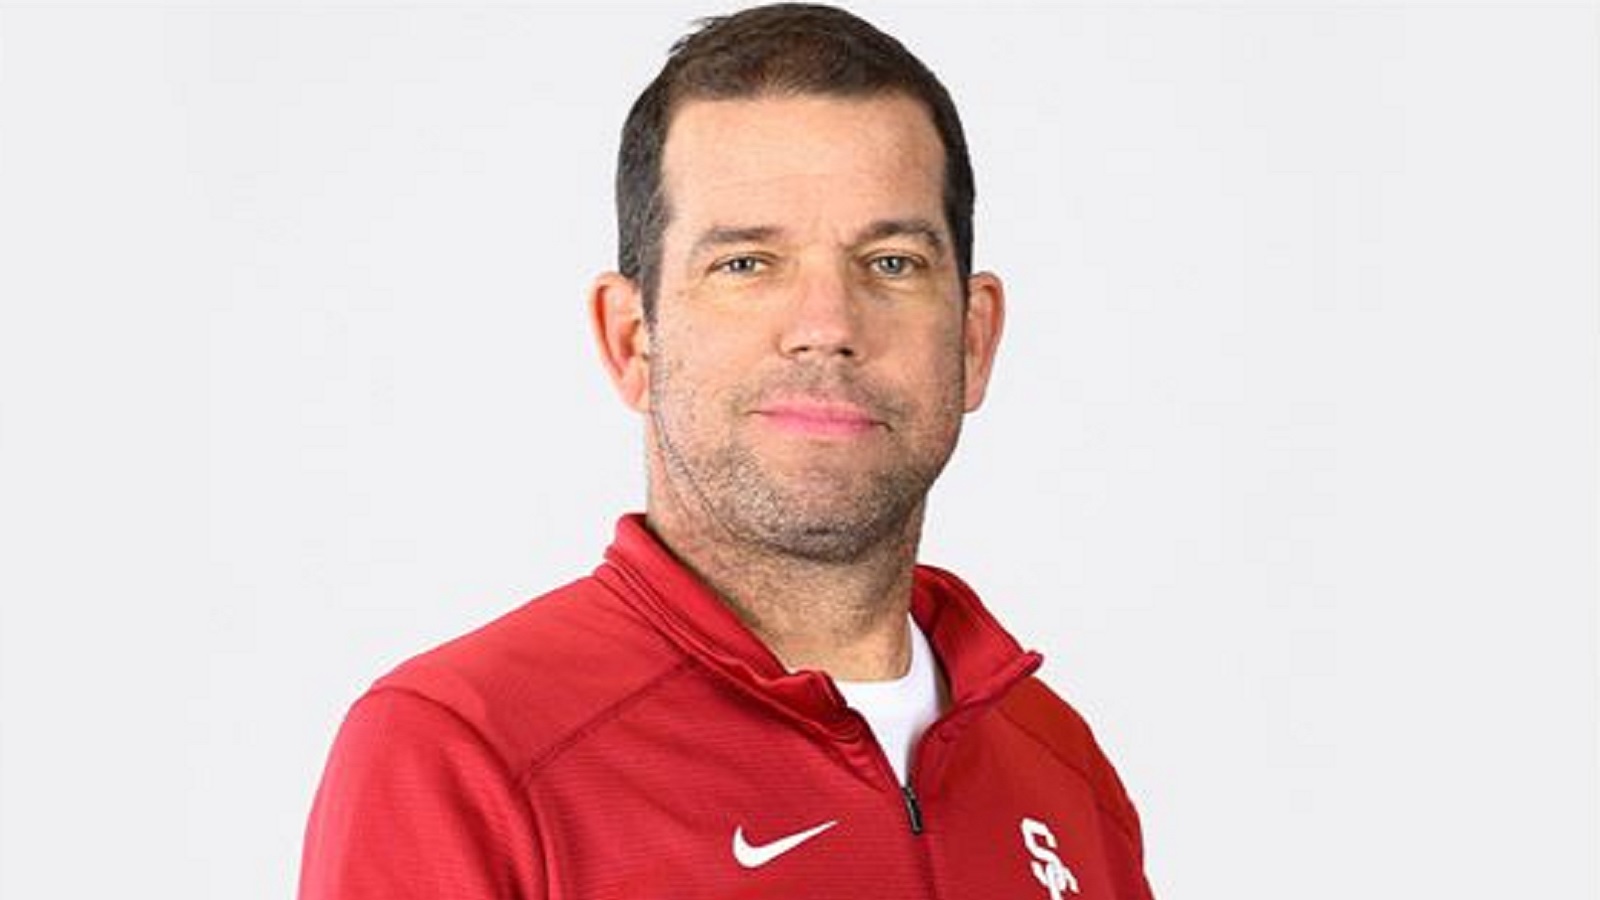 USC assistant coach Dave Nichol dies at 45 after battle with cancer